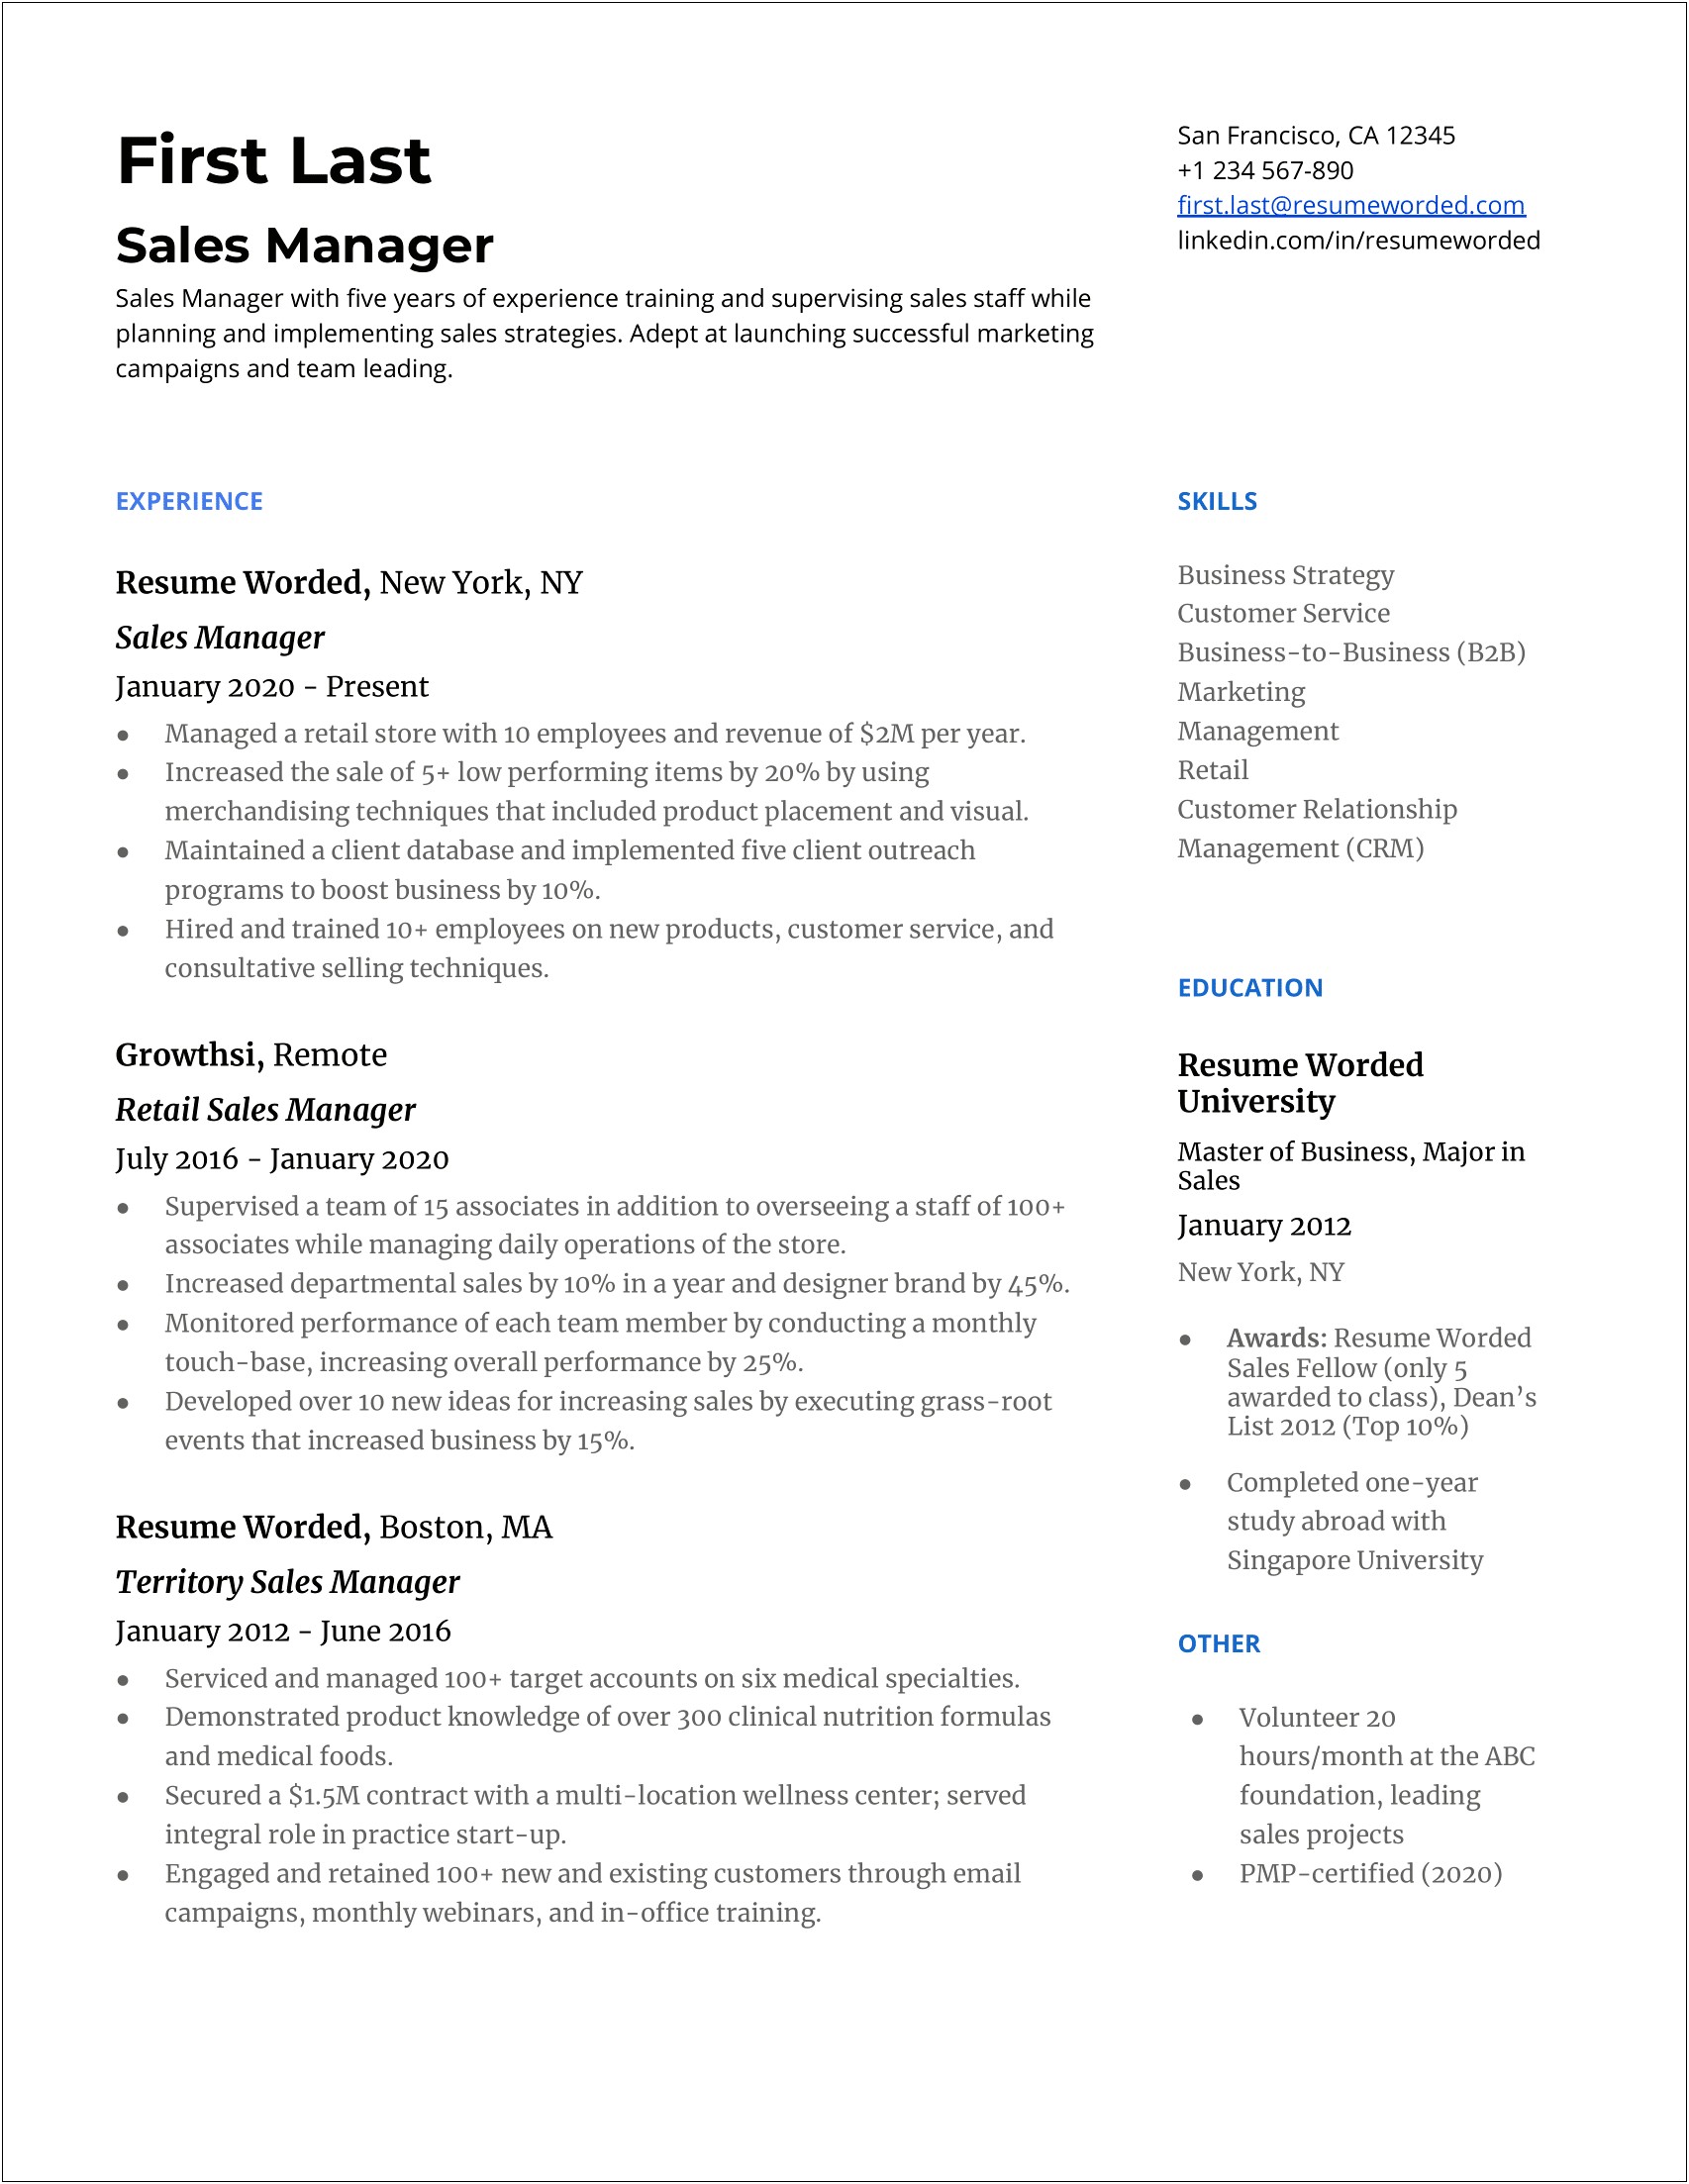 Primary Care Physician Practice Management Top Resume Example